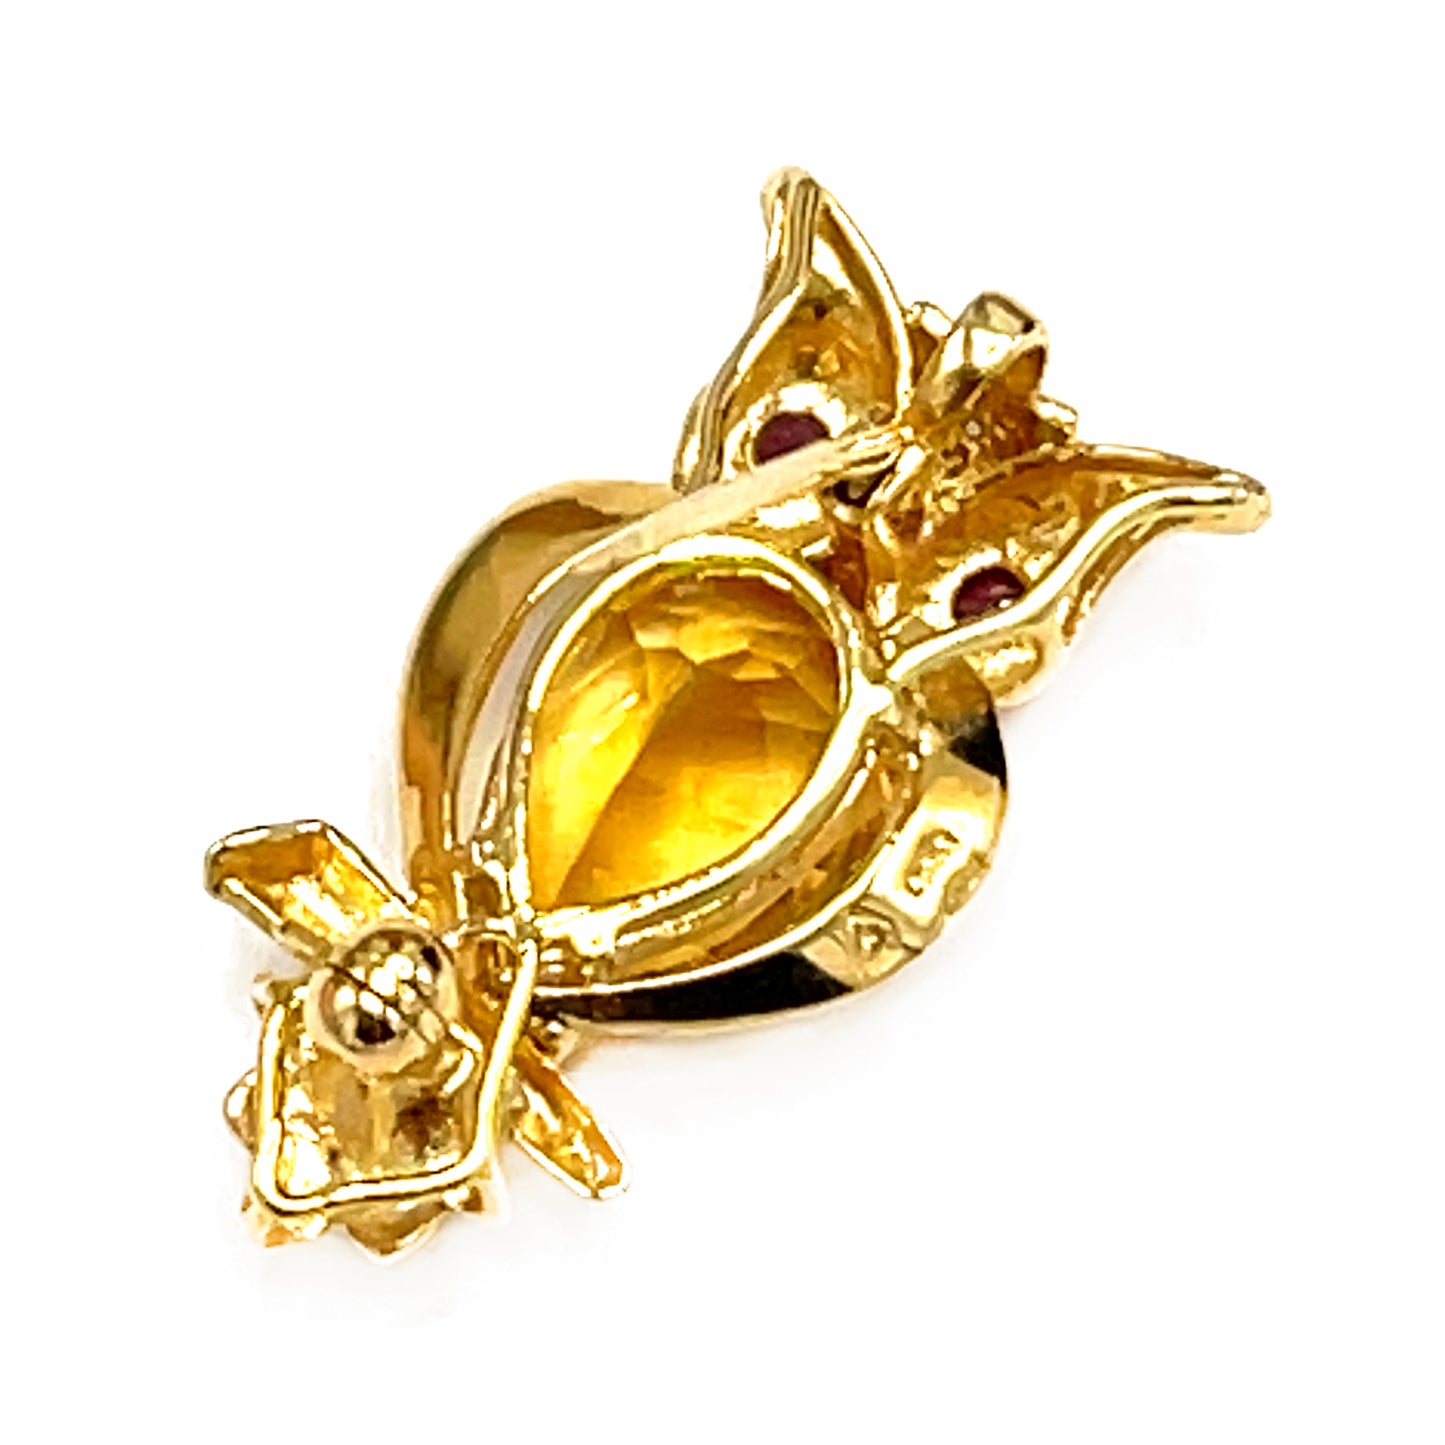 14kt Yellow Gold Citrine Owl Pin with Ruby Eyes